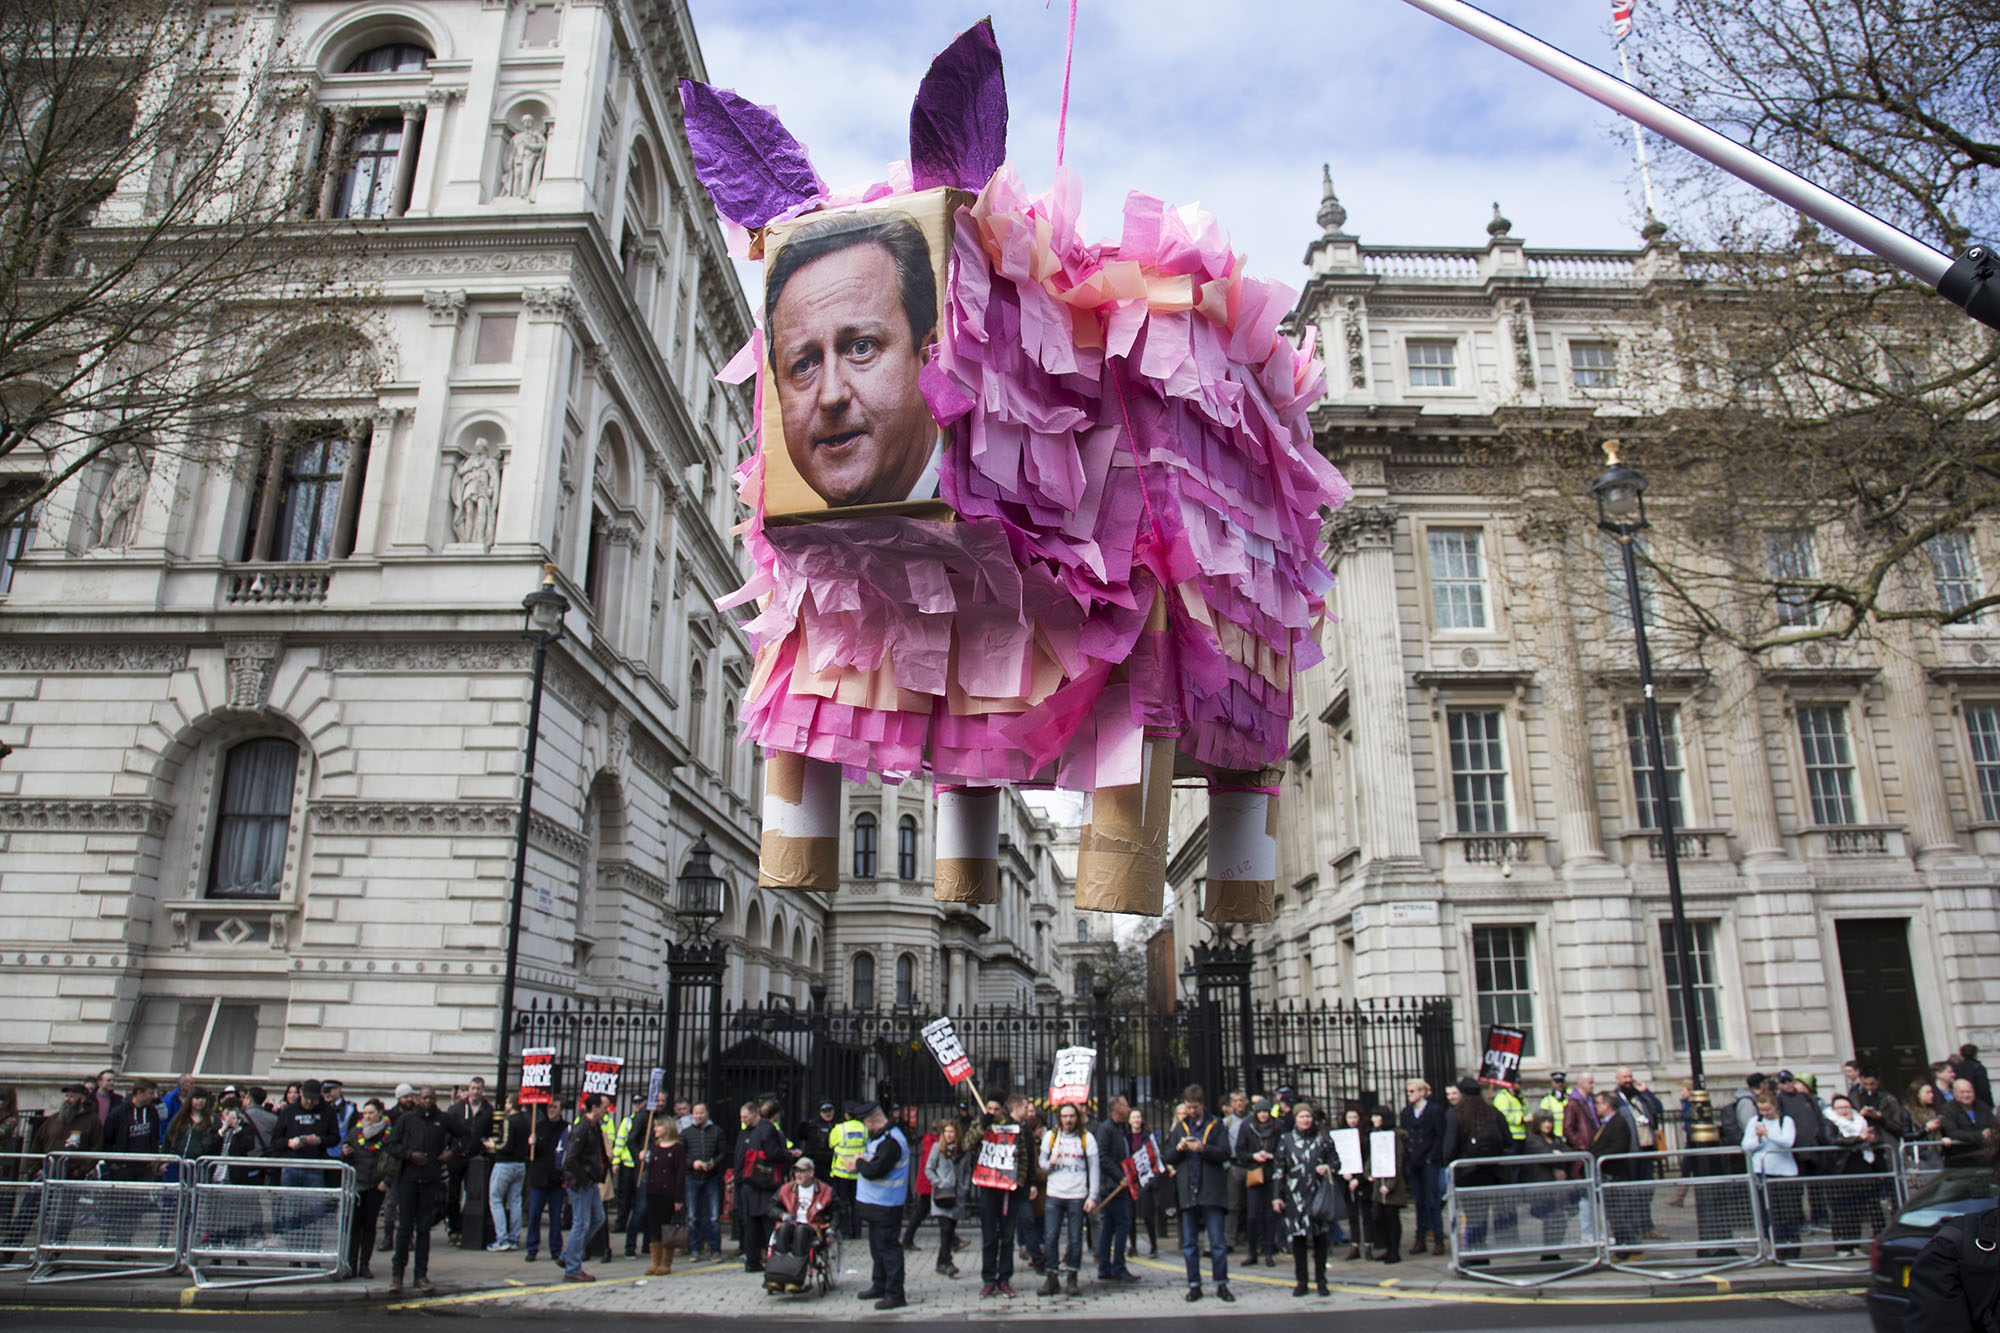  David Cameron pig shaped pinata during a demonstration outside Downing Street as protesters gather against David Cameron’s links to offshore finances. 